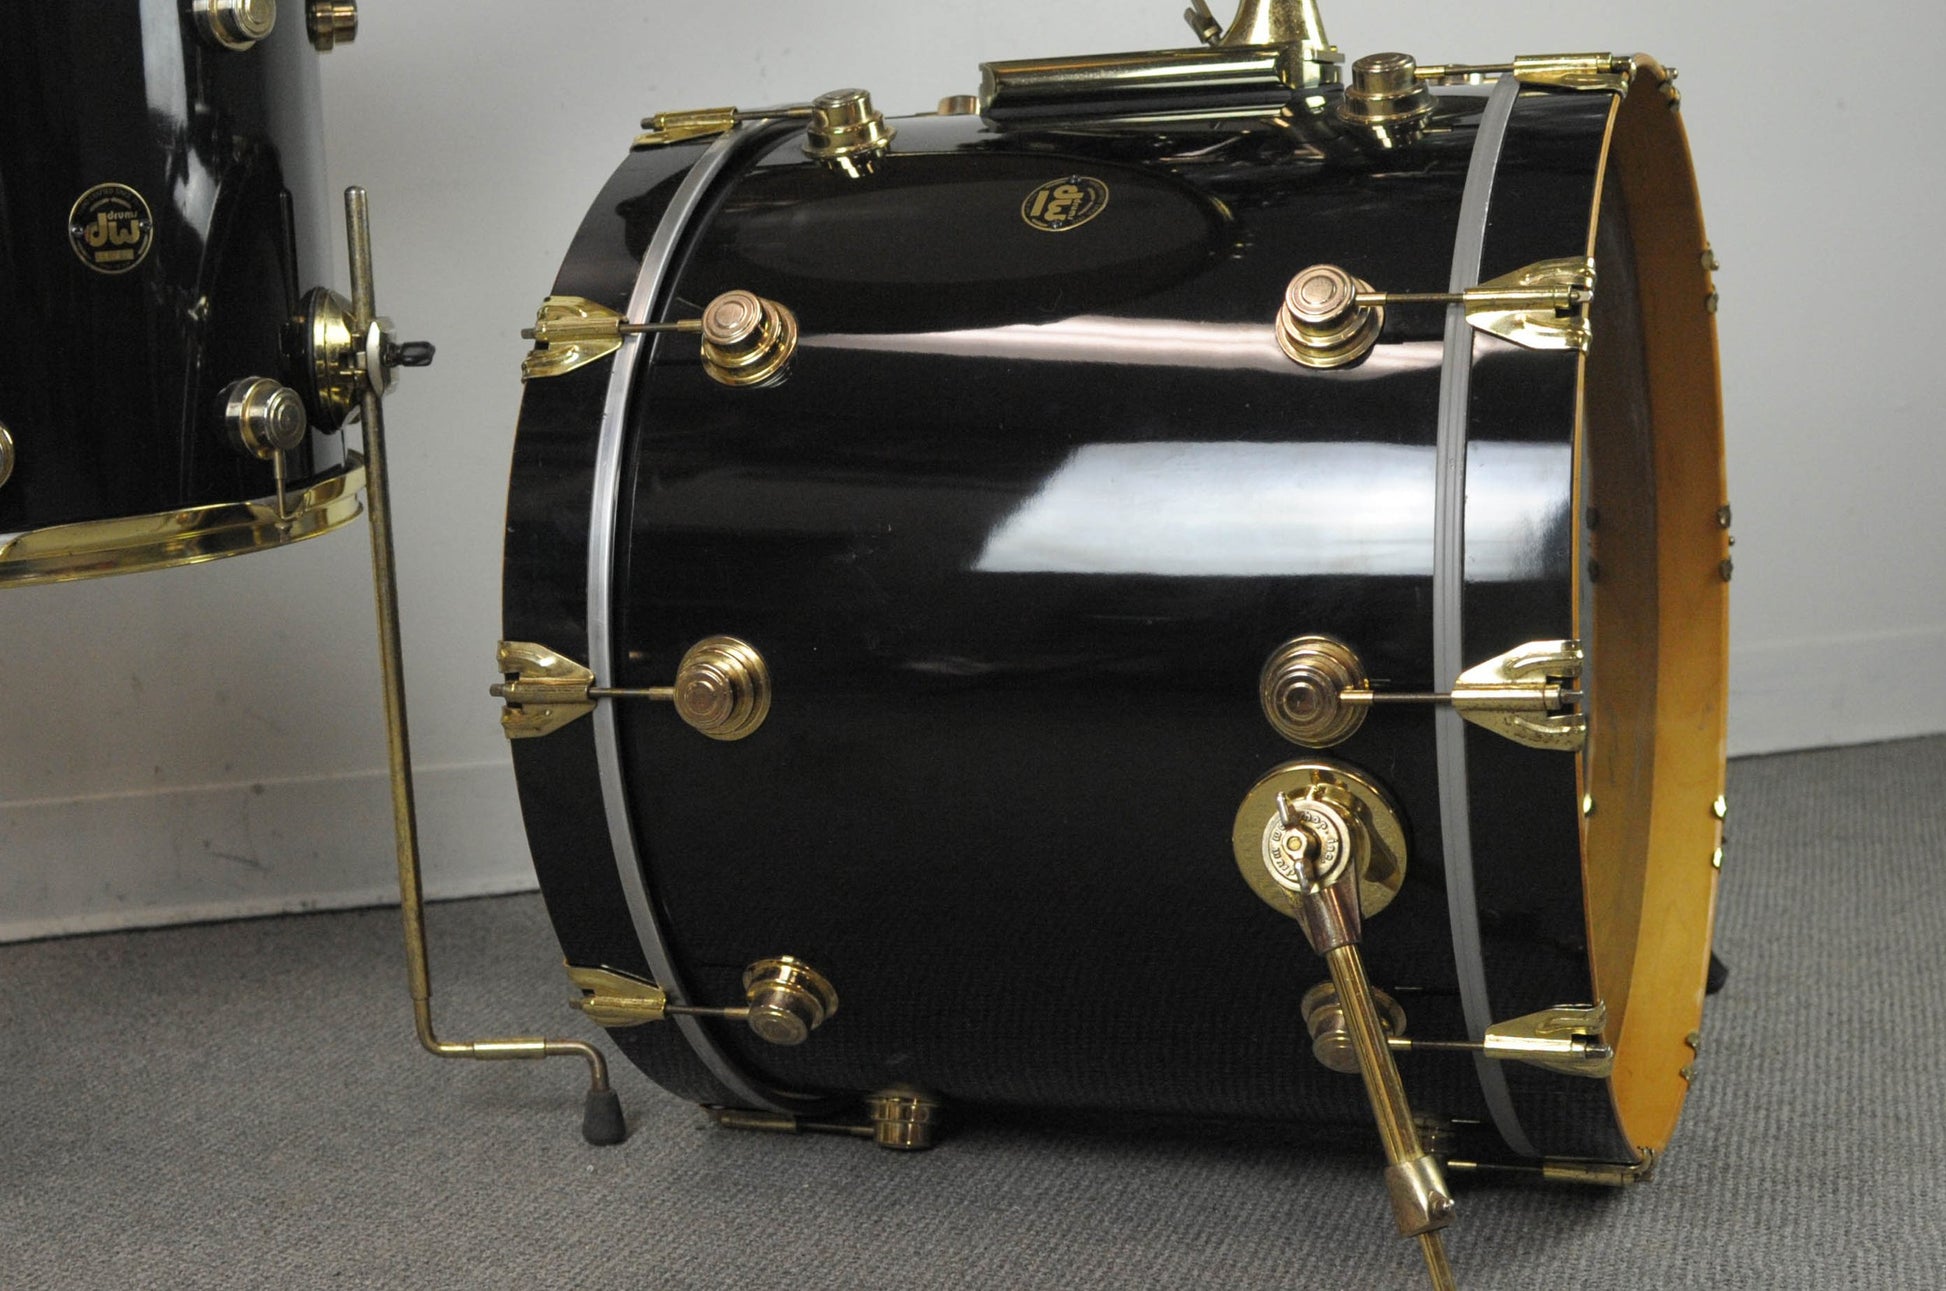 1998 DW "Black and Gold" Drum Set